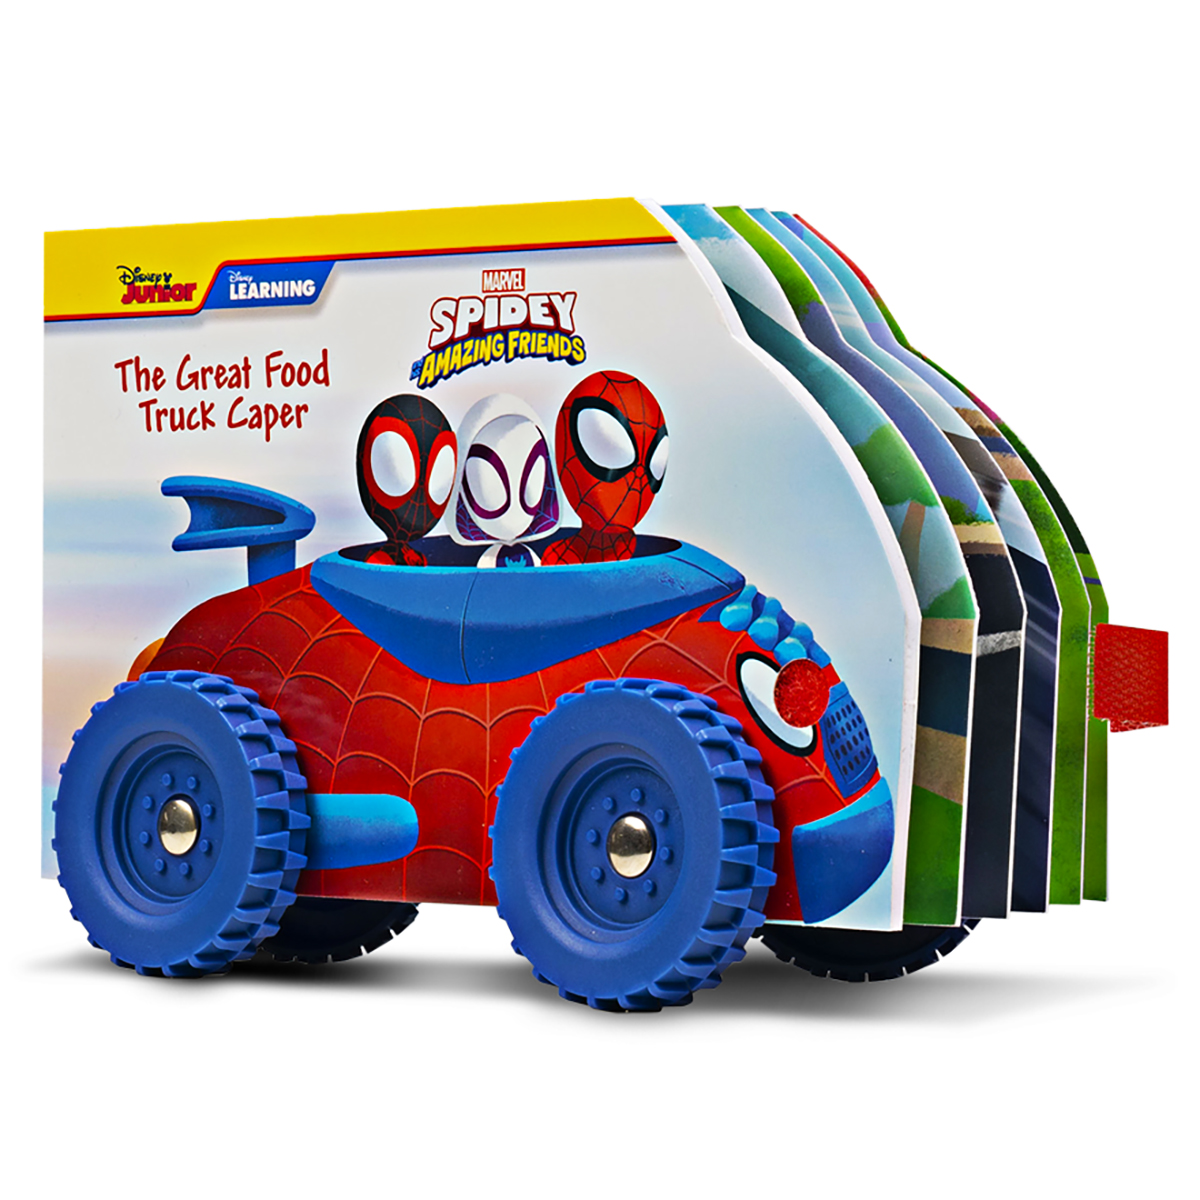  Spidey and his Amazing Friends: The Great Food Truck Caper 